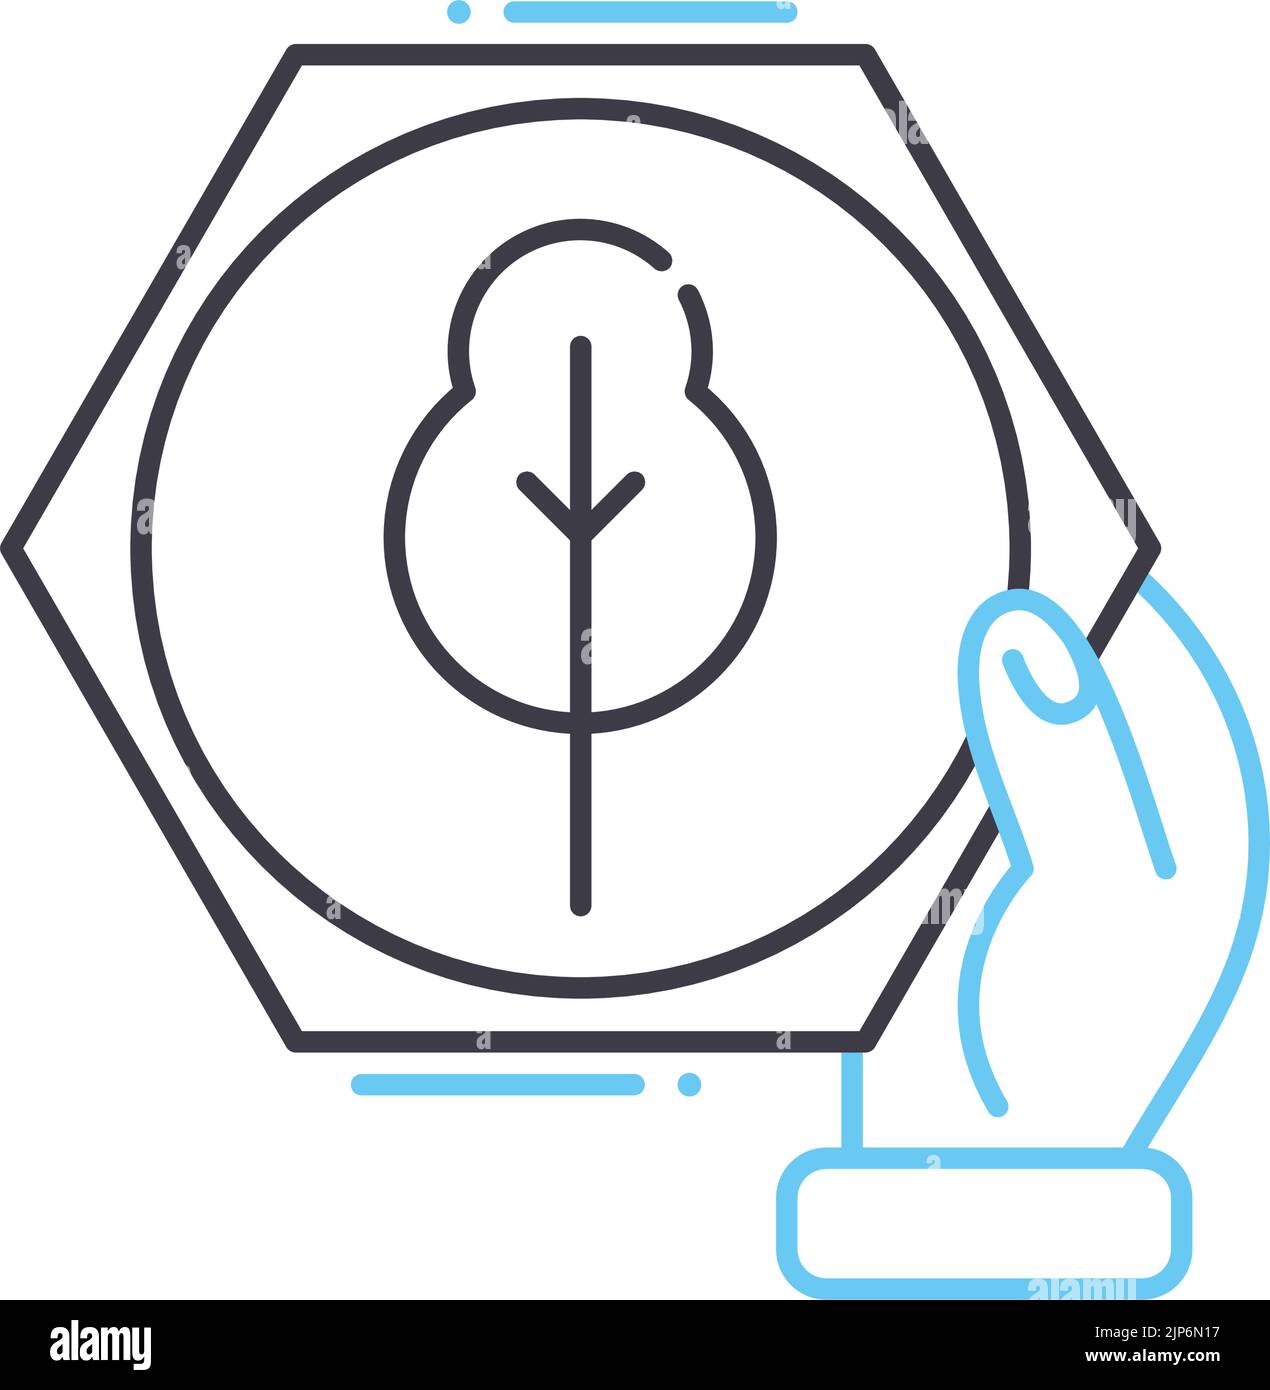 environmental consulting line icon, outline symbol, vector illustration, concept sign Stock Vector